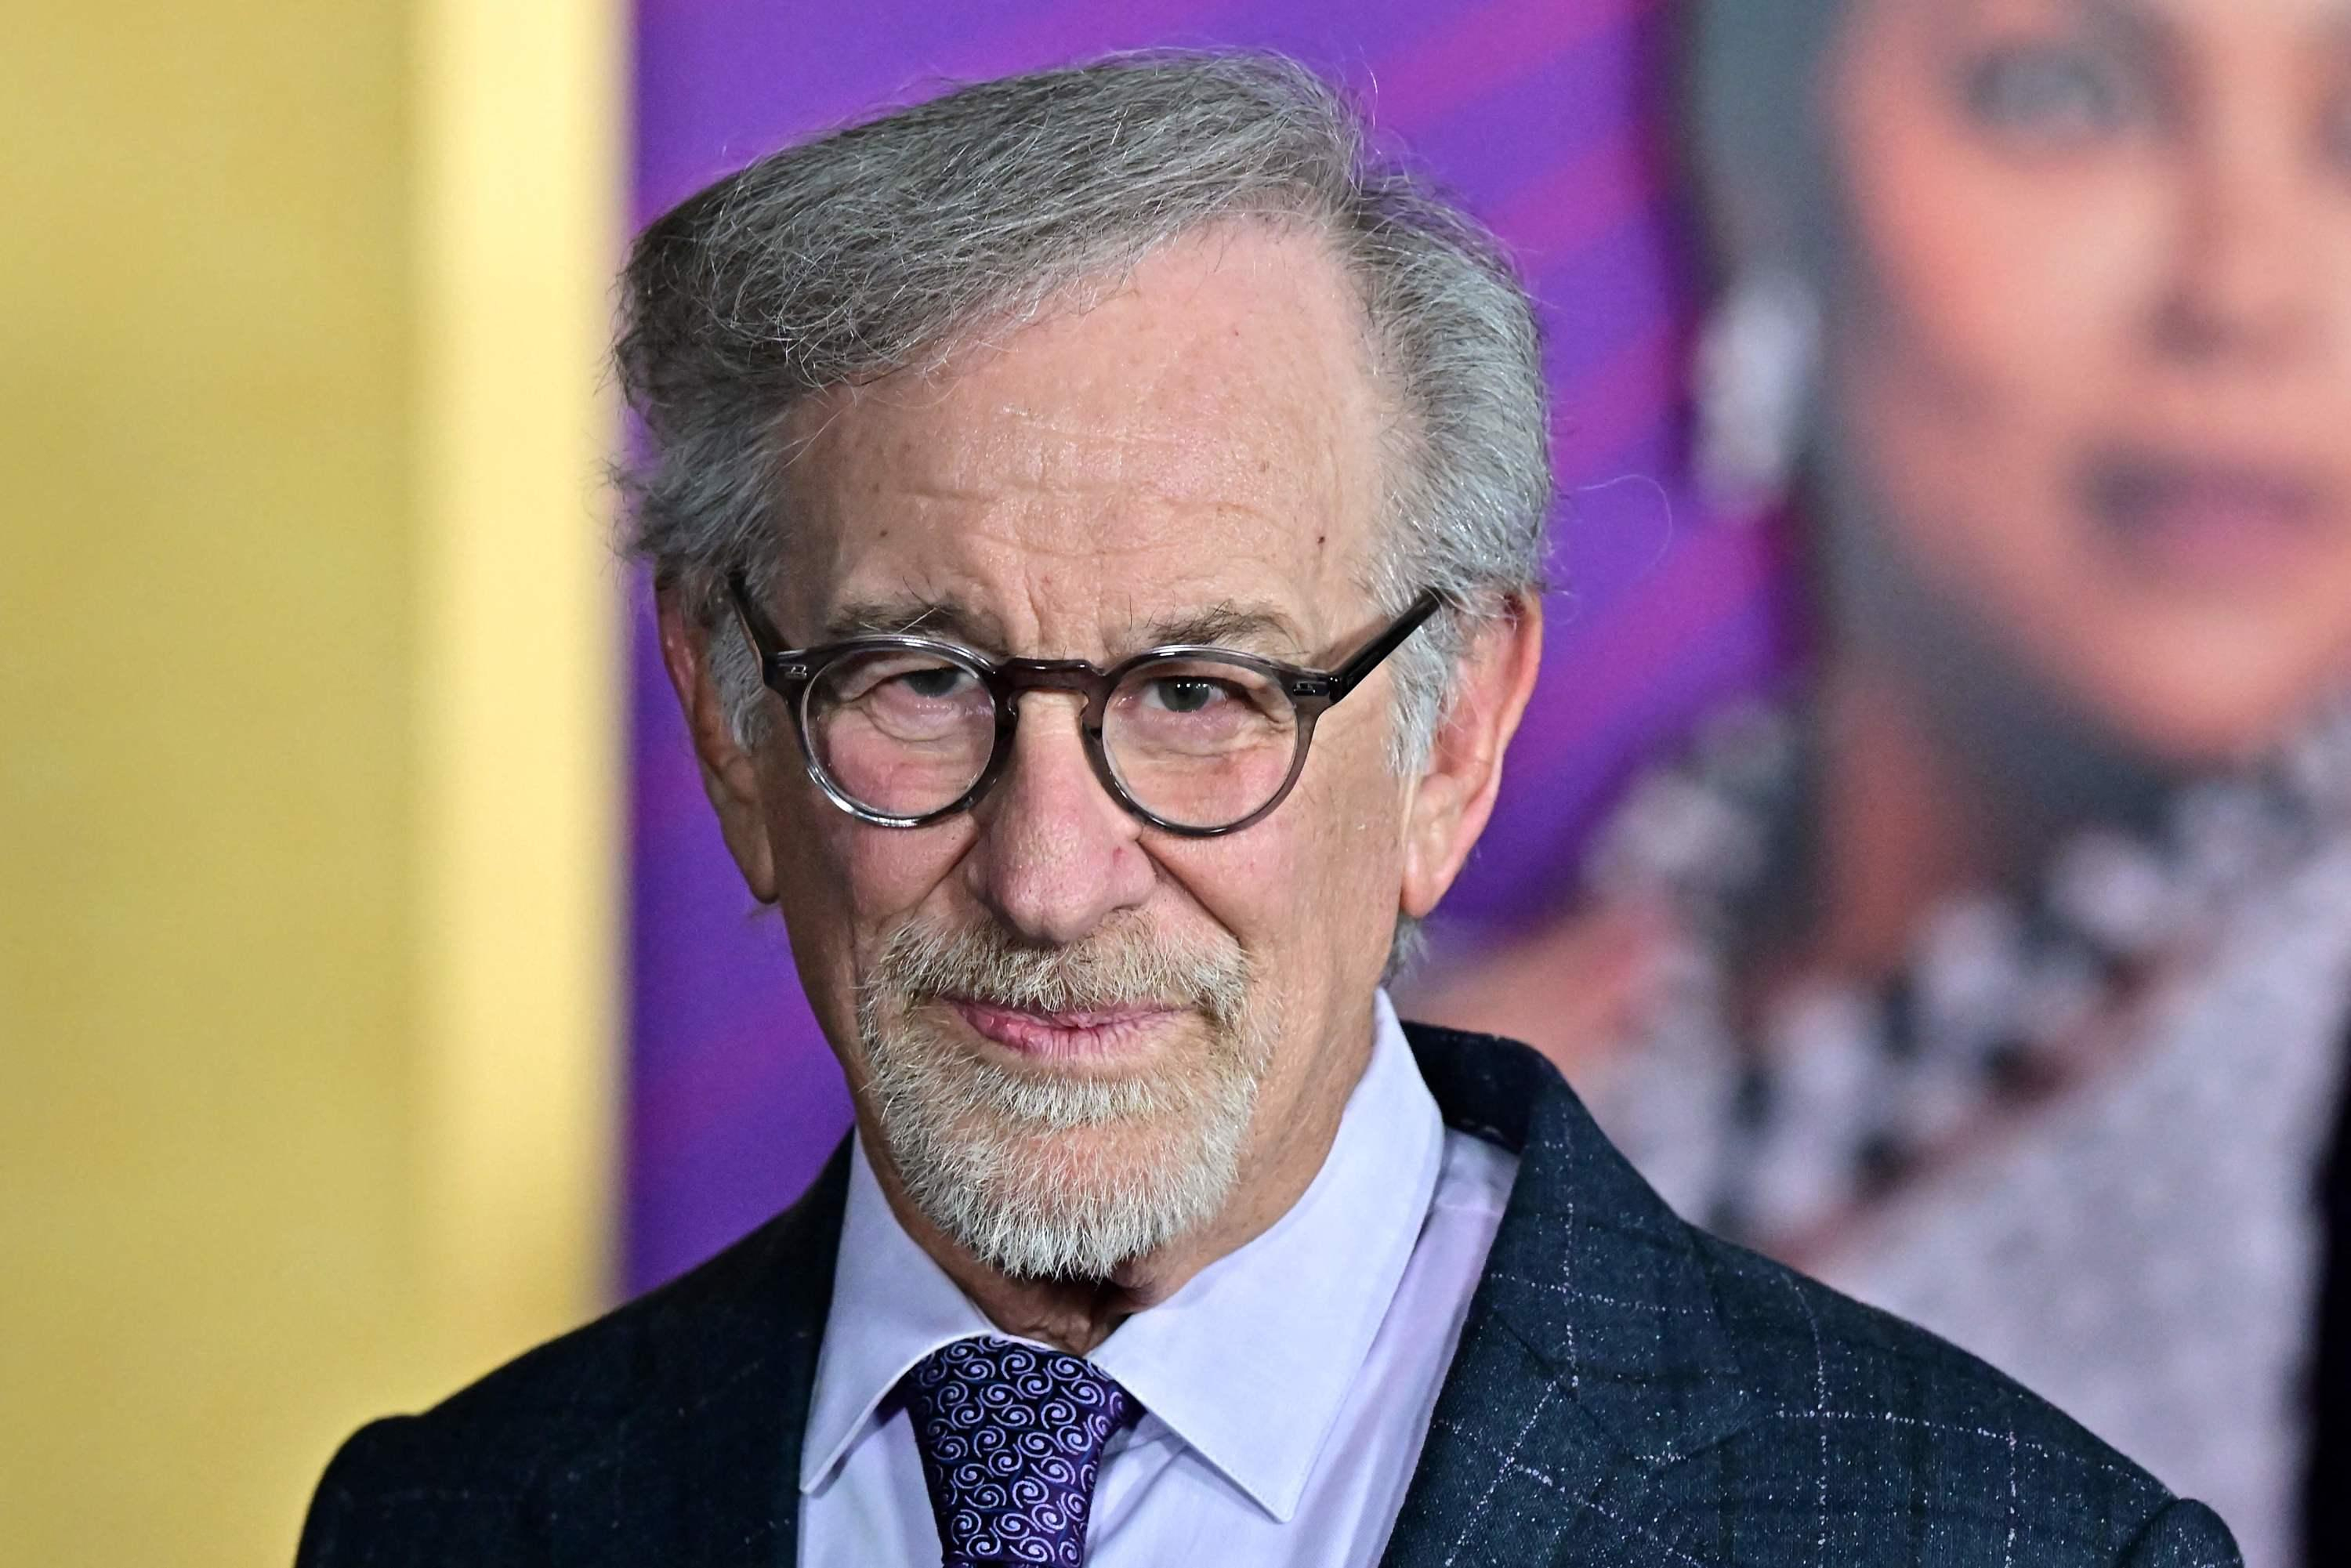 “Unspeakable barbarity”: Steven Spielberg reacts to Hamas attacks